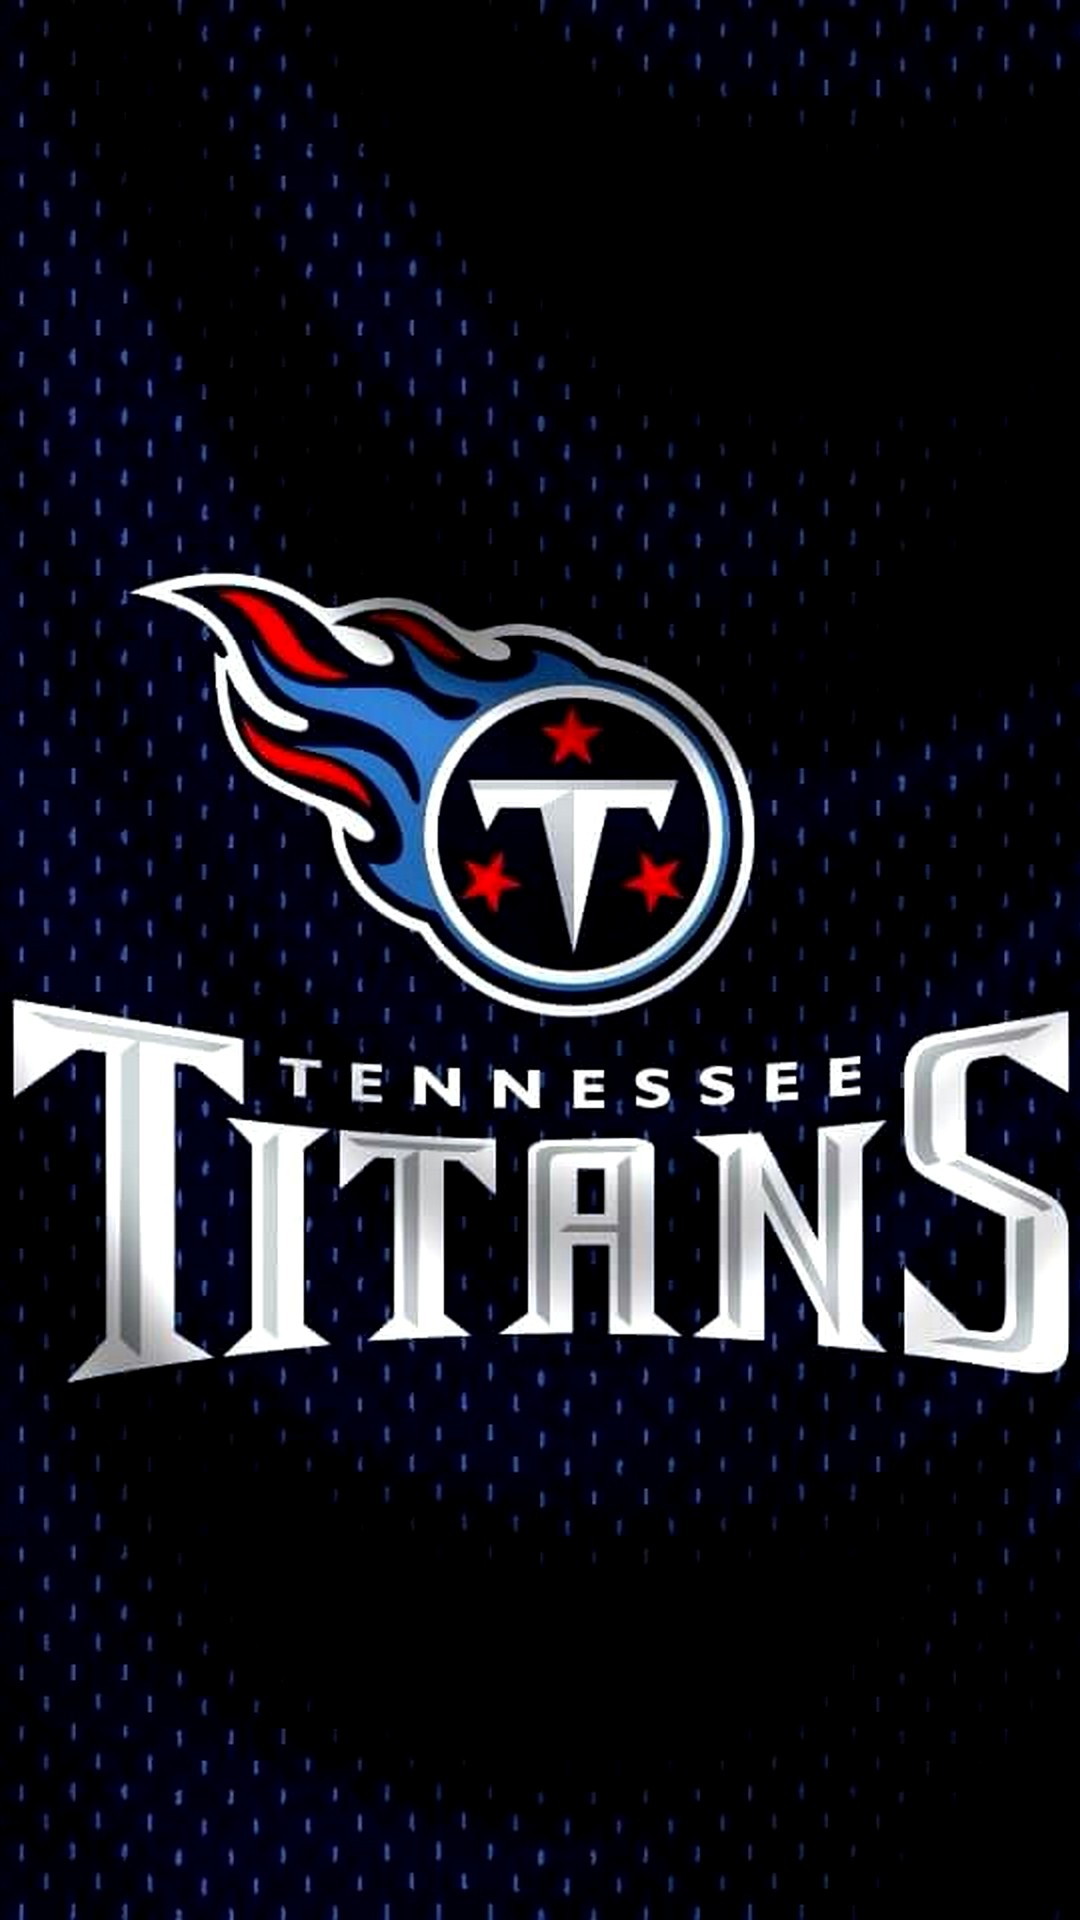 Wallpaper Mobile Tennessee Titans with high-resolution 1080x1920 pixel. You can use and set as wallpaper for Notebook Screensavers, Mac Wallpapers, Mobile Home Screen, iPhone or Android Phones Lock Screen